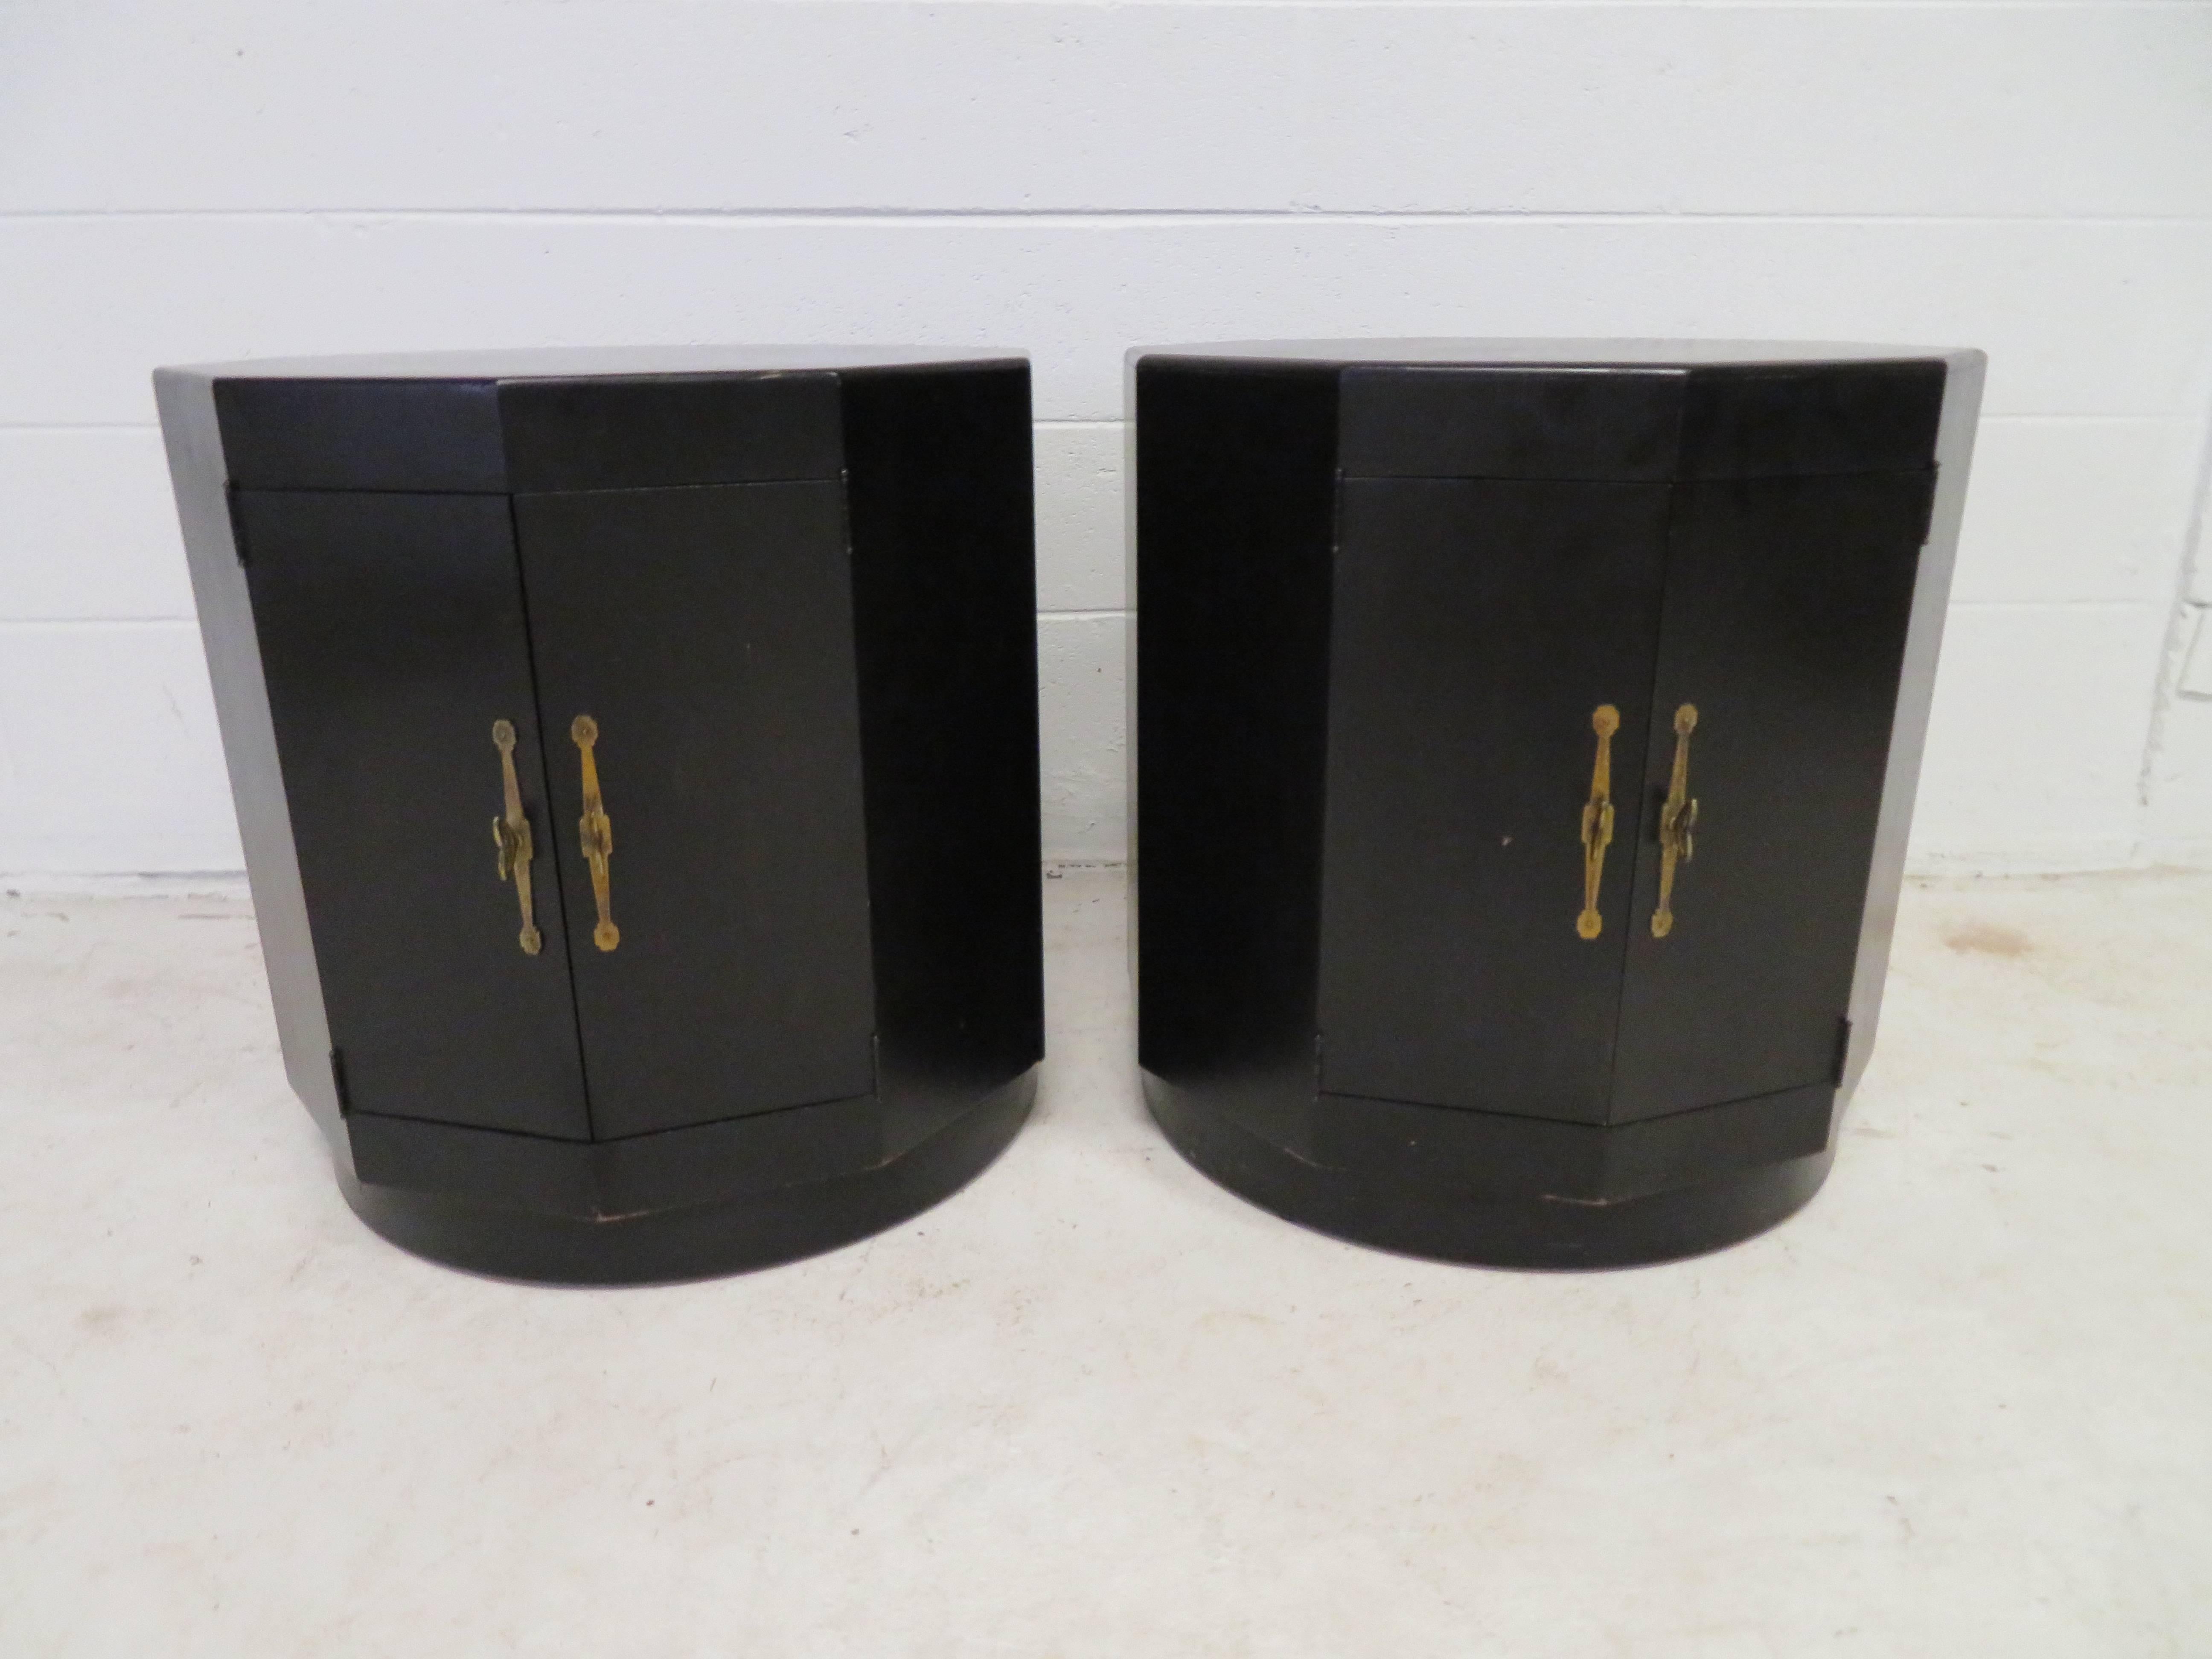 Wonderful pair of Harvey Probber attributed black octagon side drum tables. This pair retains their original black lacquered finish in very nice vintage condition-does have some scuffs and dings but gives them authentic charm. Double doors open to